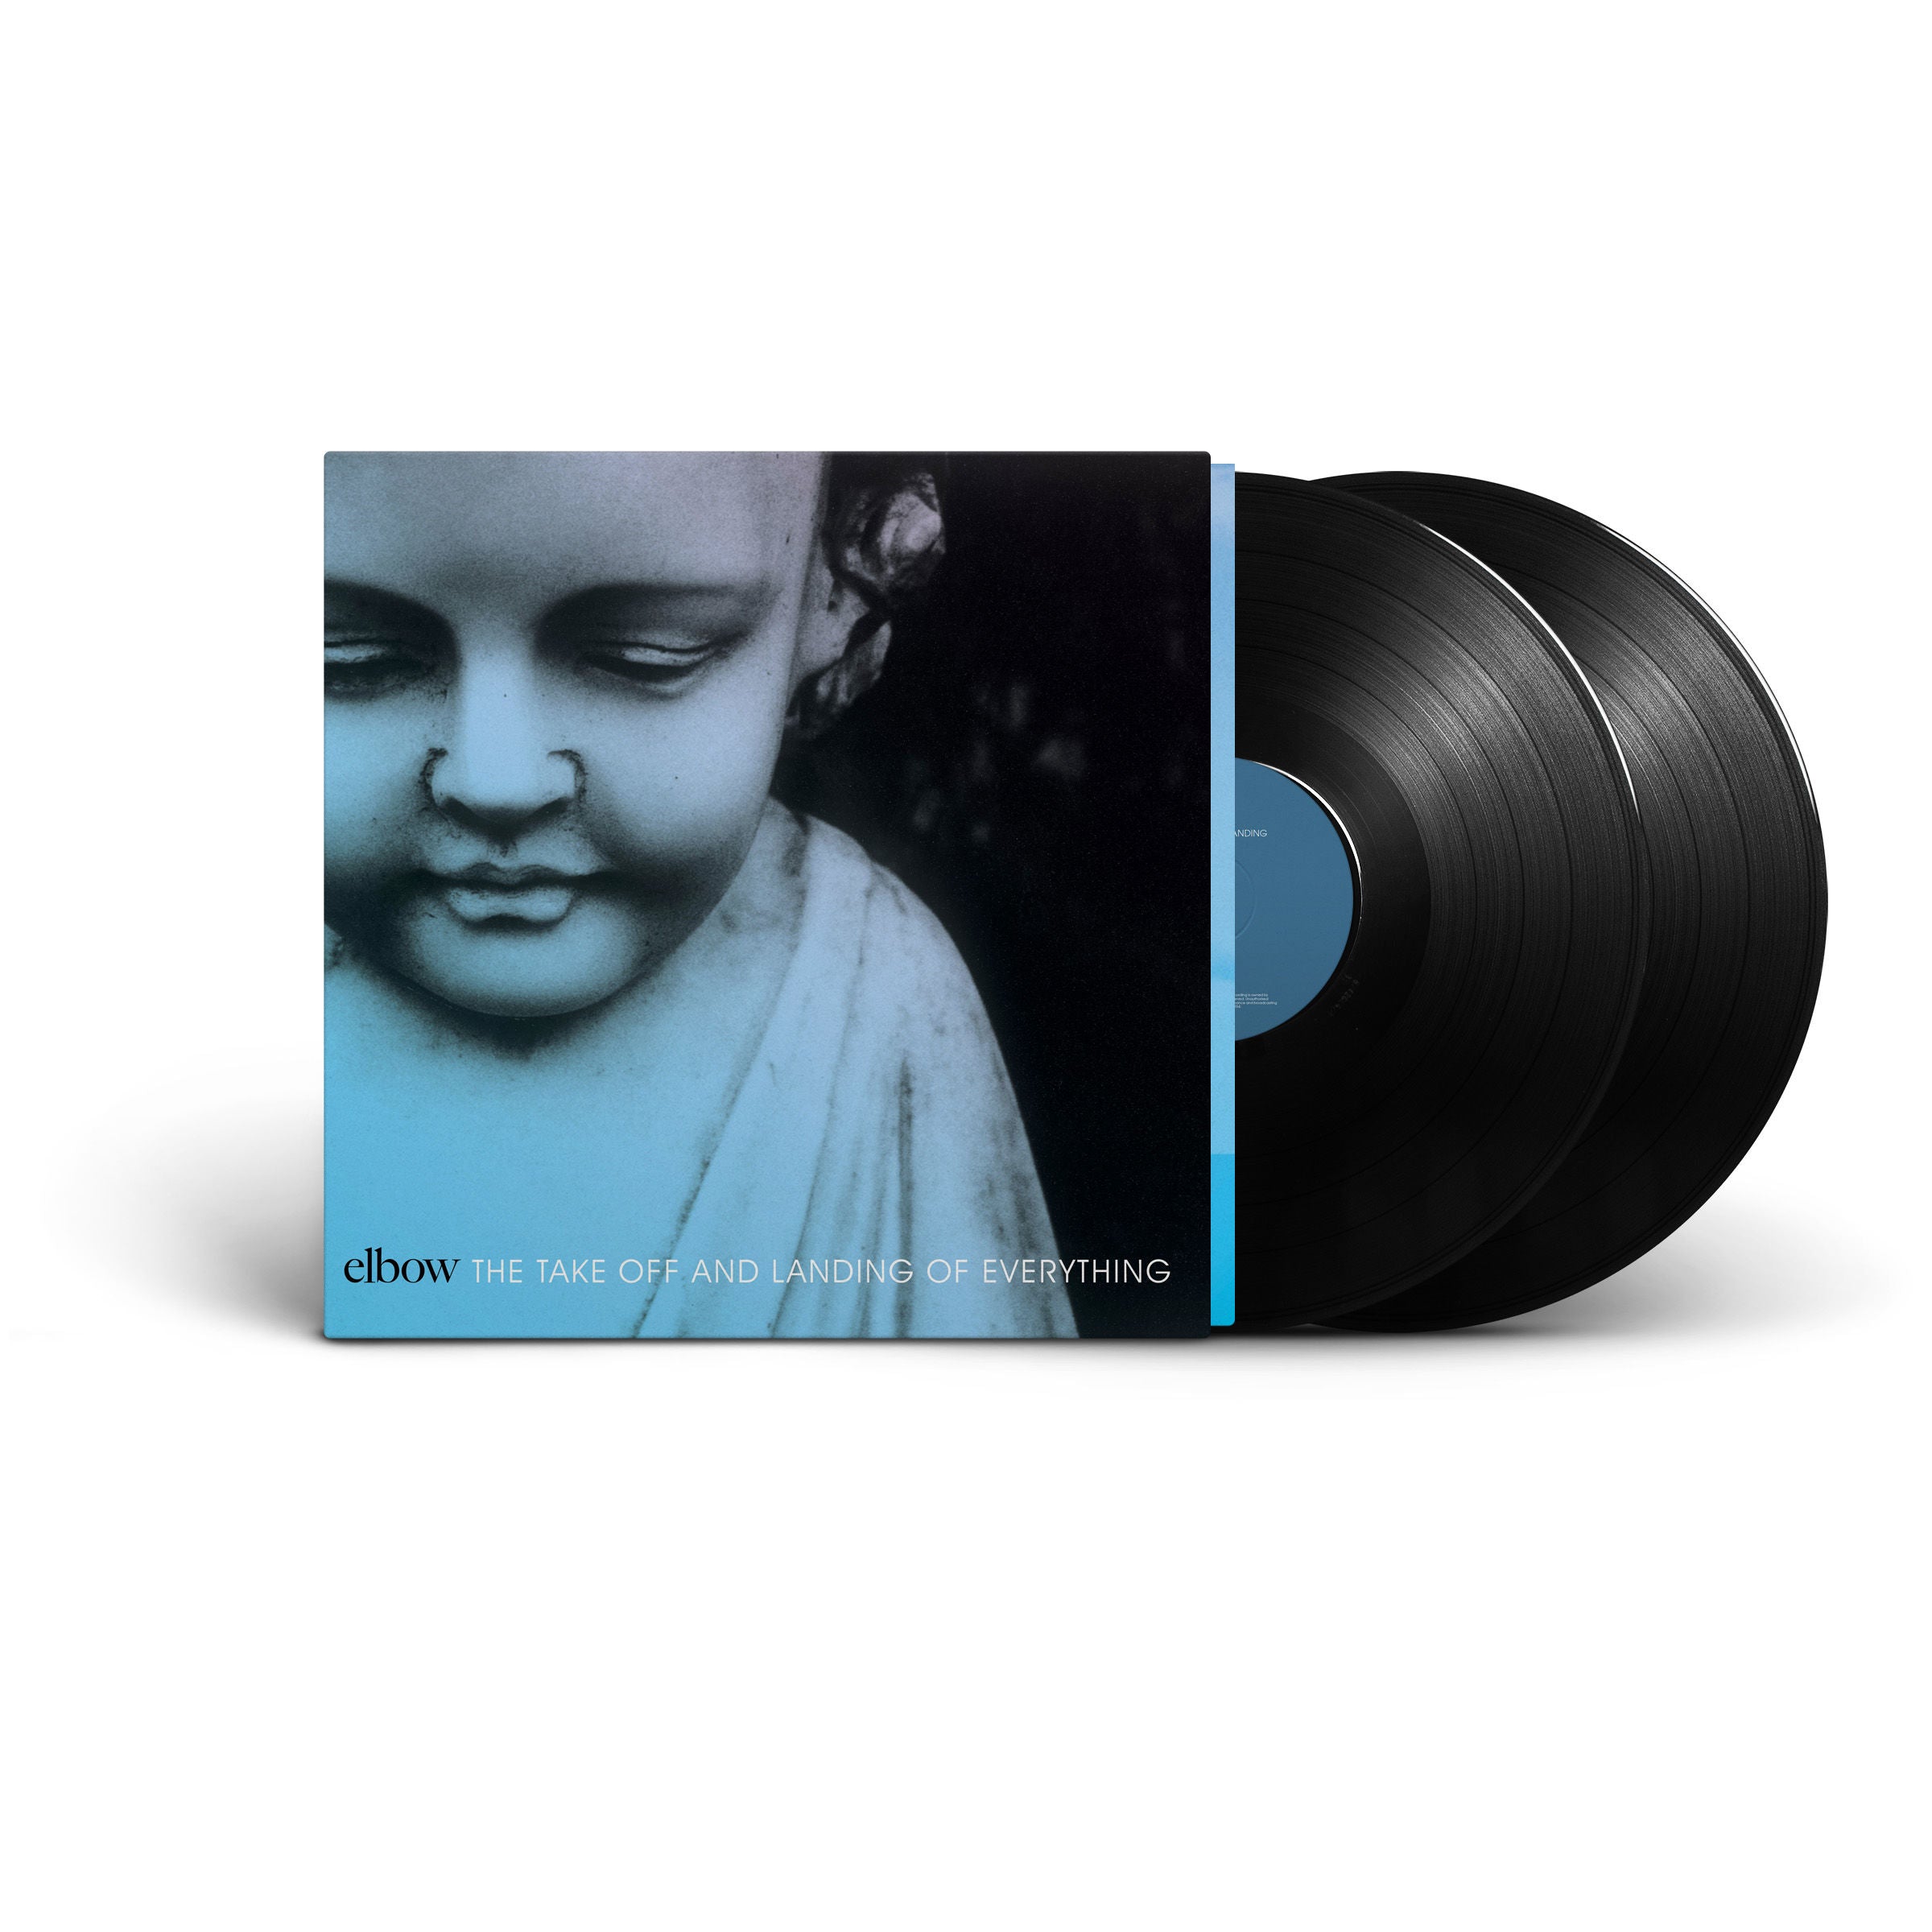 Elbow - The Take Off And Landing Of Everything: Vinyl 2LP